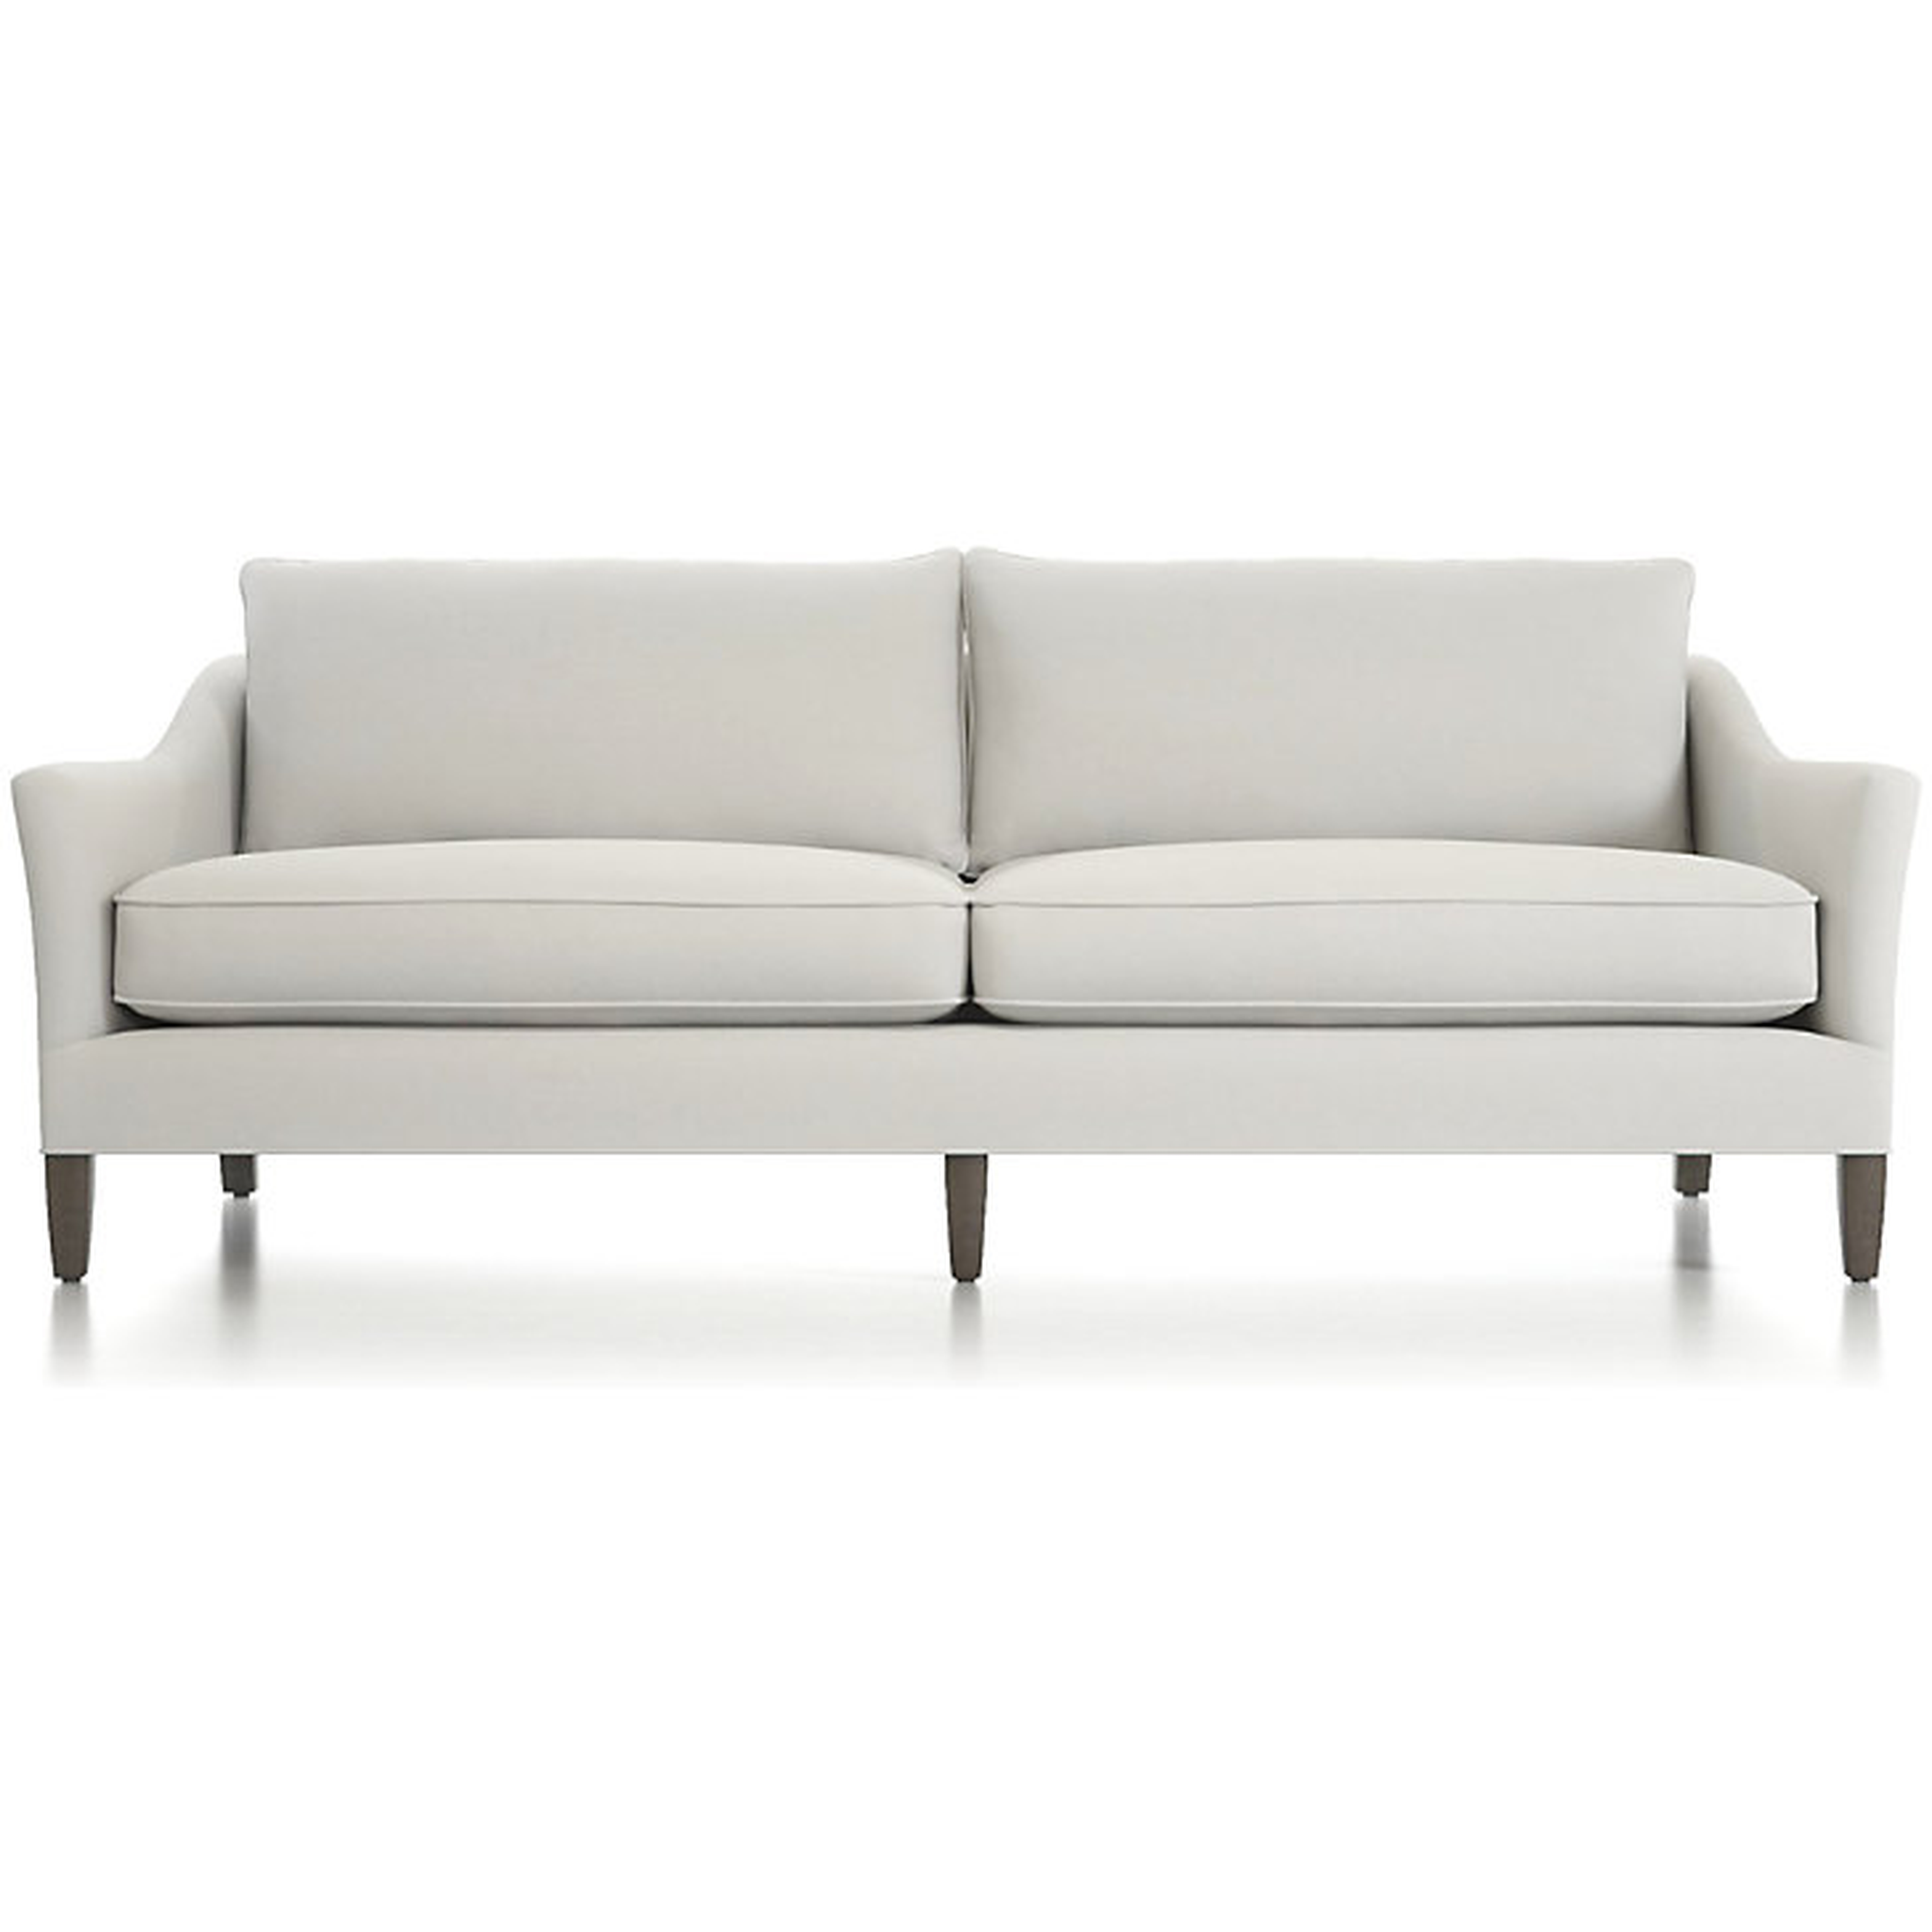 Keely Sofa - Crate and Barrel